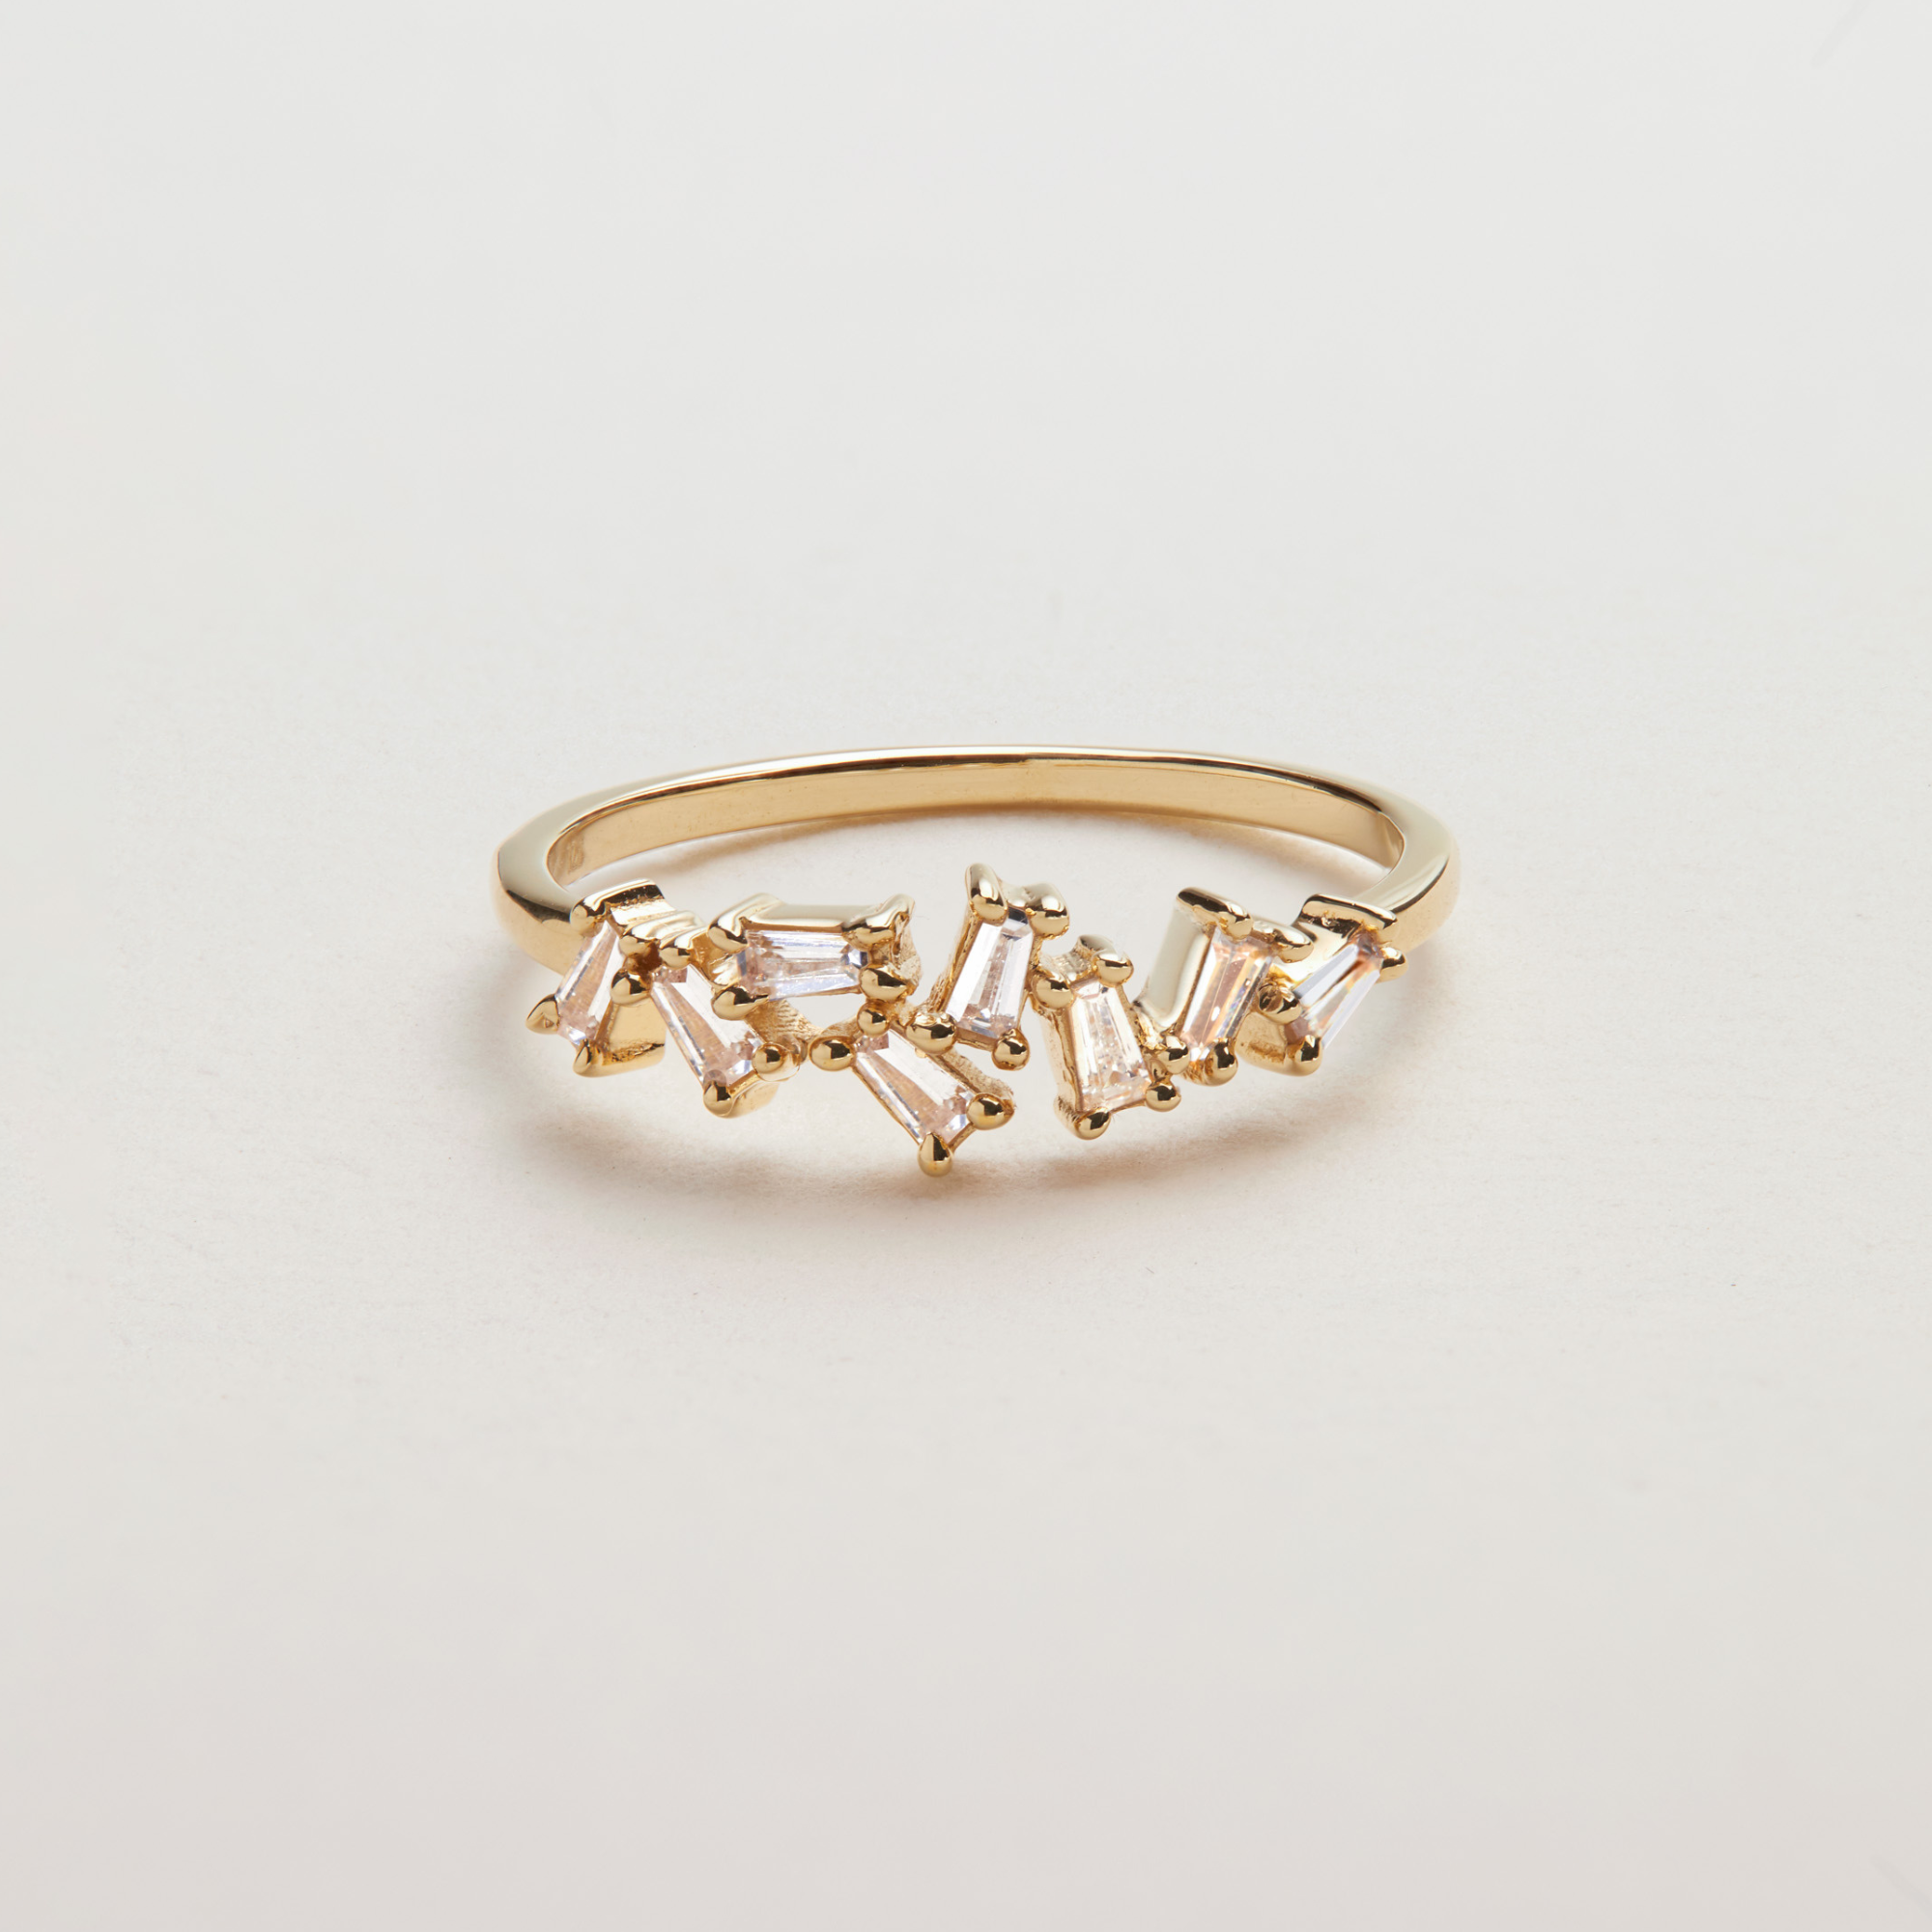 A gold diamond style baguette ring lying on a white surface